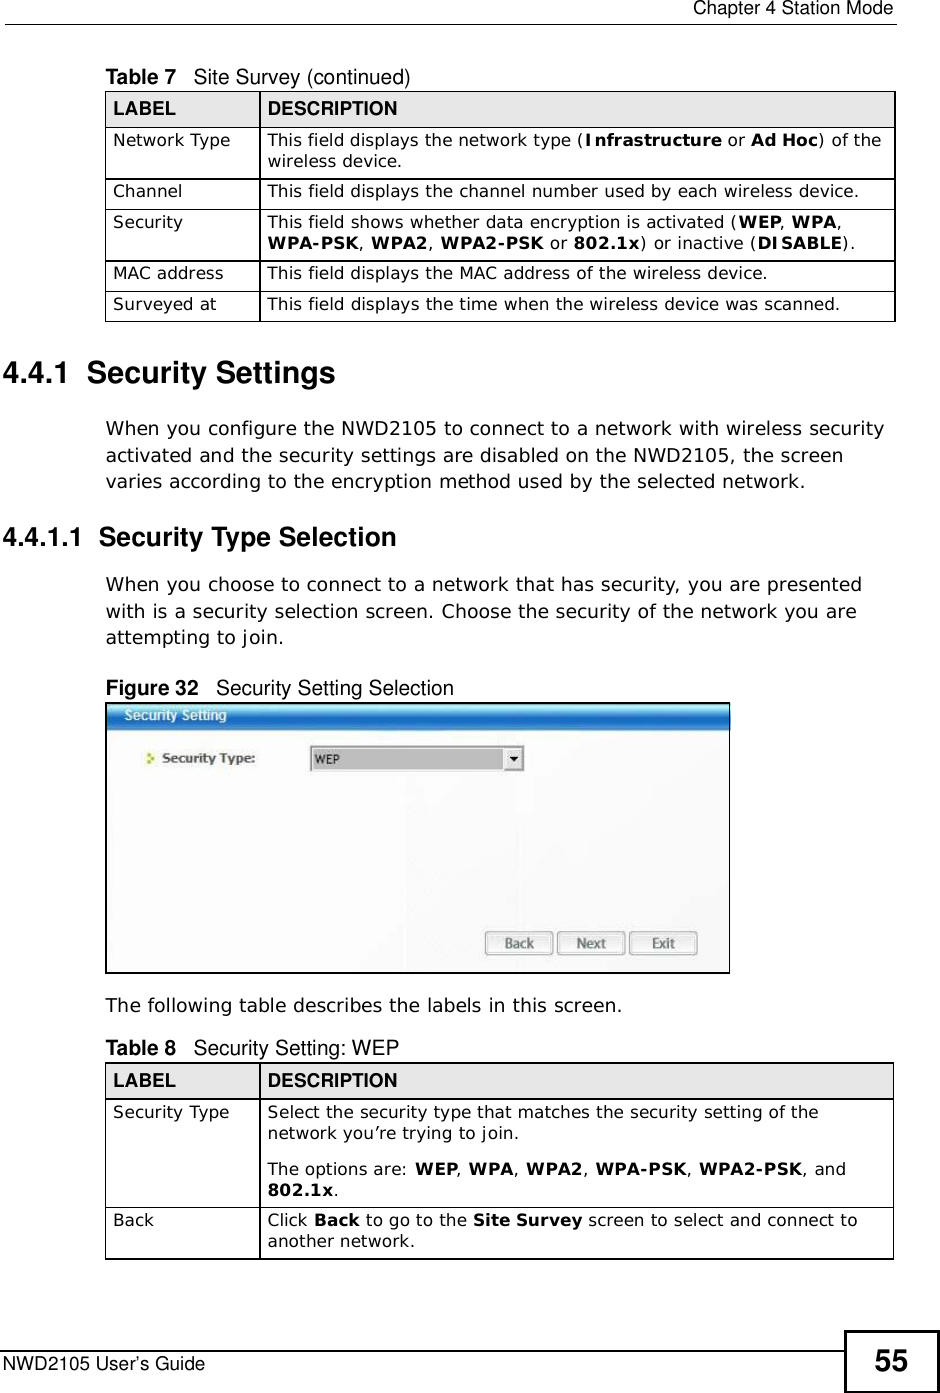  Chapter 4Station ModeNWD2105 User’s Guide 554.4.1  Security Settings When you configure the NWD2105 to connect to a network with wireless security activated and the security settings are disabled on the NWD2105, the screen varies according to the encryption method used by the selected network.4.4.1.1  Security Type SelectionWhen you choose to connect to a network that has security, you are presented with is a security selection screen. Choose the security of the network you are attempting to join.Figure 32   Security Setting Selection  The following table describes the labels in this screen.  Network Type This field displays the network type (Infrastructure or Ad Hoc) of the wireless device.ChannelThis field displays the channel number used by each wireless device.SecurityThis field shows whether data encryption is activated (WEP,WPA,WPA-PSK,WPA2,WPA2-PSK or 802.1x) or inactive (DISABLE).MAC address This field displays the MAC address of the wireless device.Surveyed at This field displays the time when the wireless device was scanned.Table 7   Site Survey (continued)LABEL DESCRIPTIONTable 8   Security Setting: WEP LABEL DESCRIPTIONSecurity TypeSelect the security type that matches the security setting of the network you’re trying to join. The options are: WEP,WPA,WPA2,WPA-PSK, WPA2-PSK, and 802.1x.BackClick Back to go to the Site Survey screen to select and connect to another network.